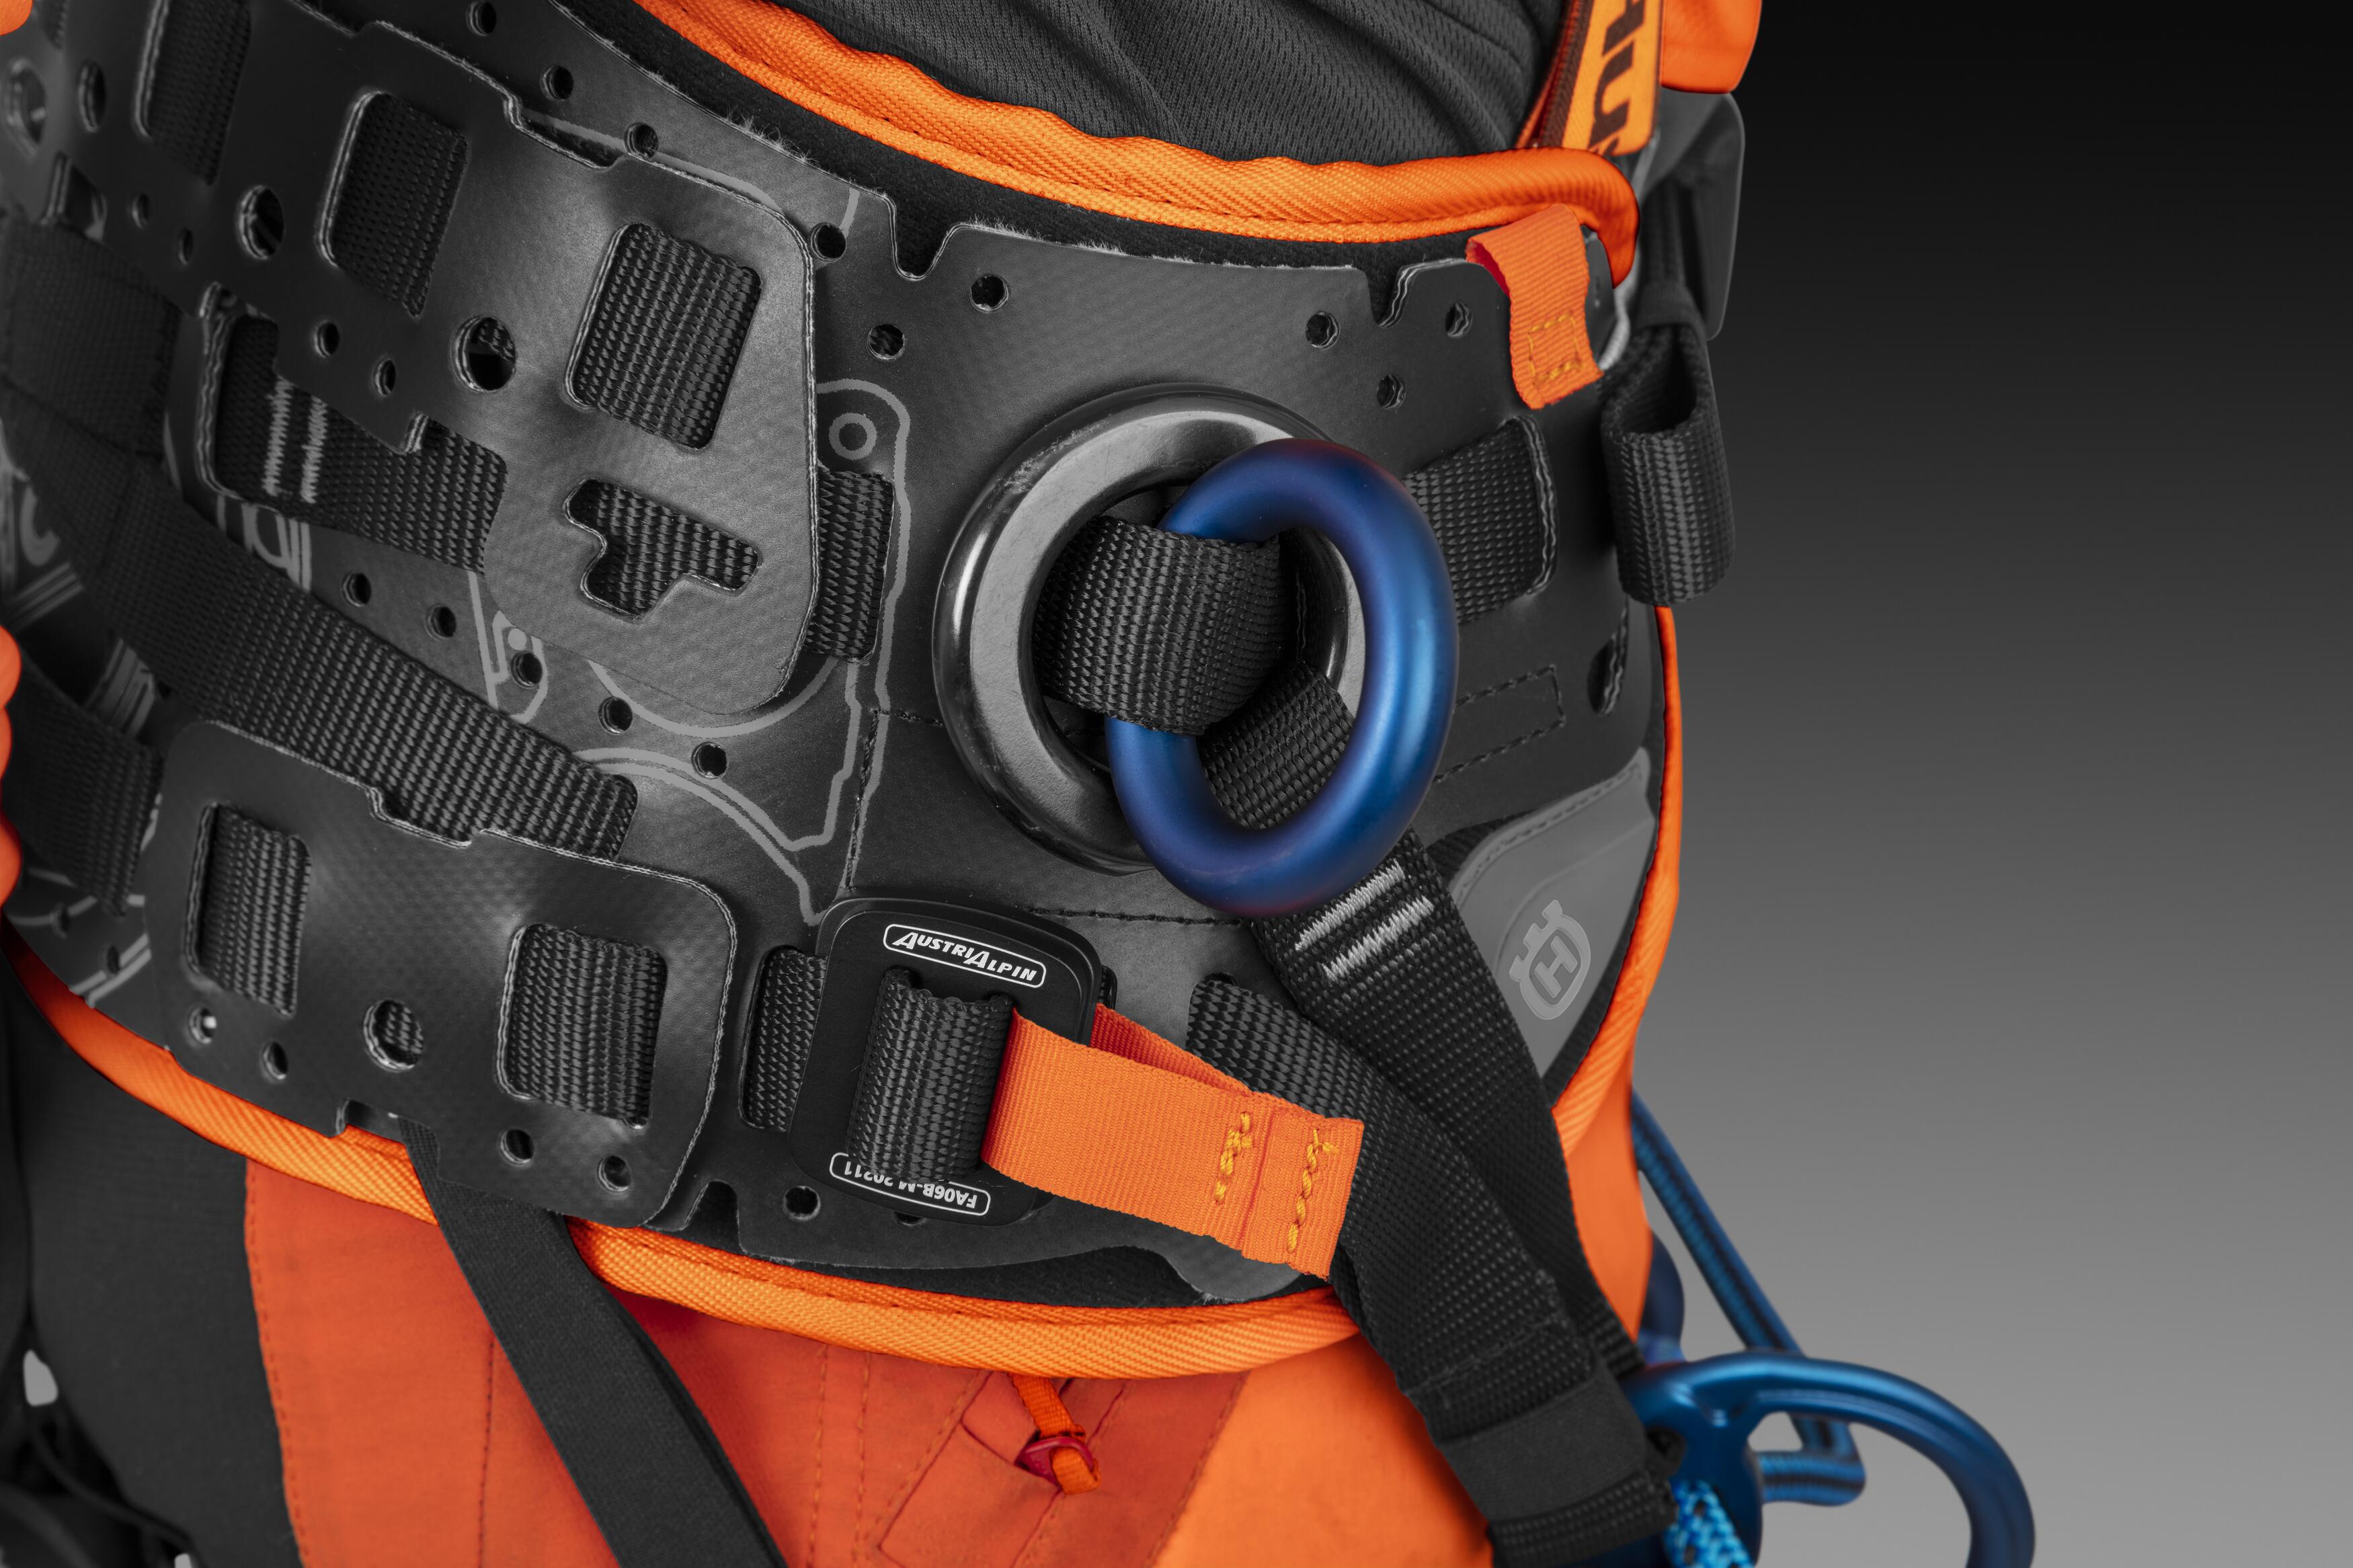 Climbing harness, Color coded attachment hardware